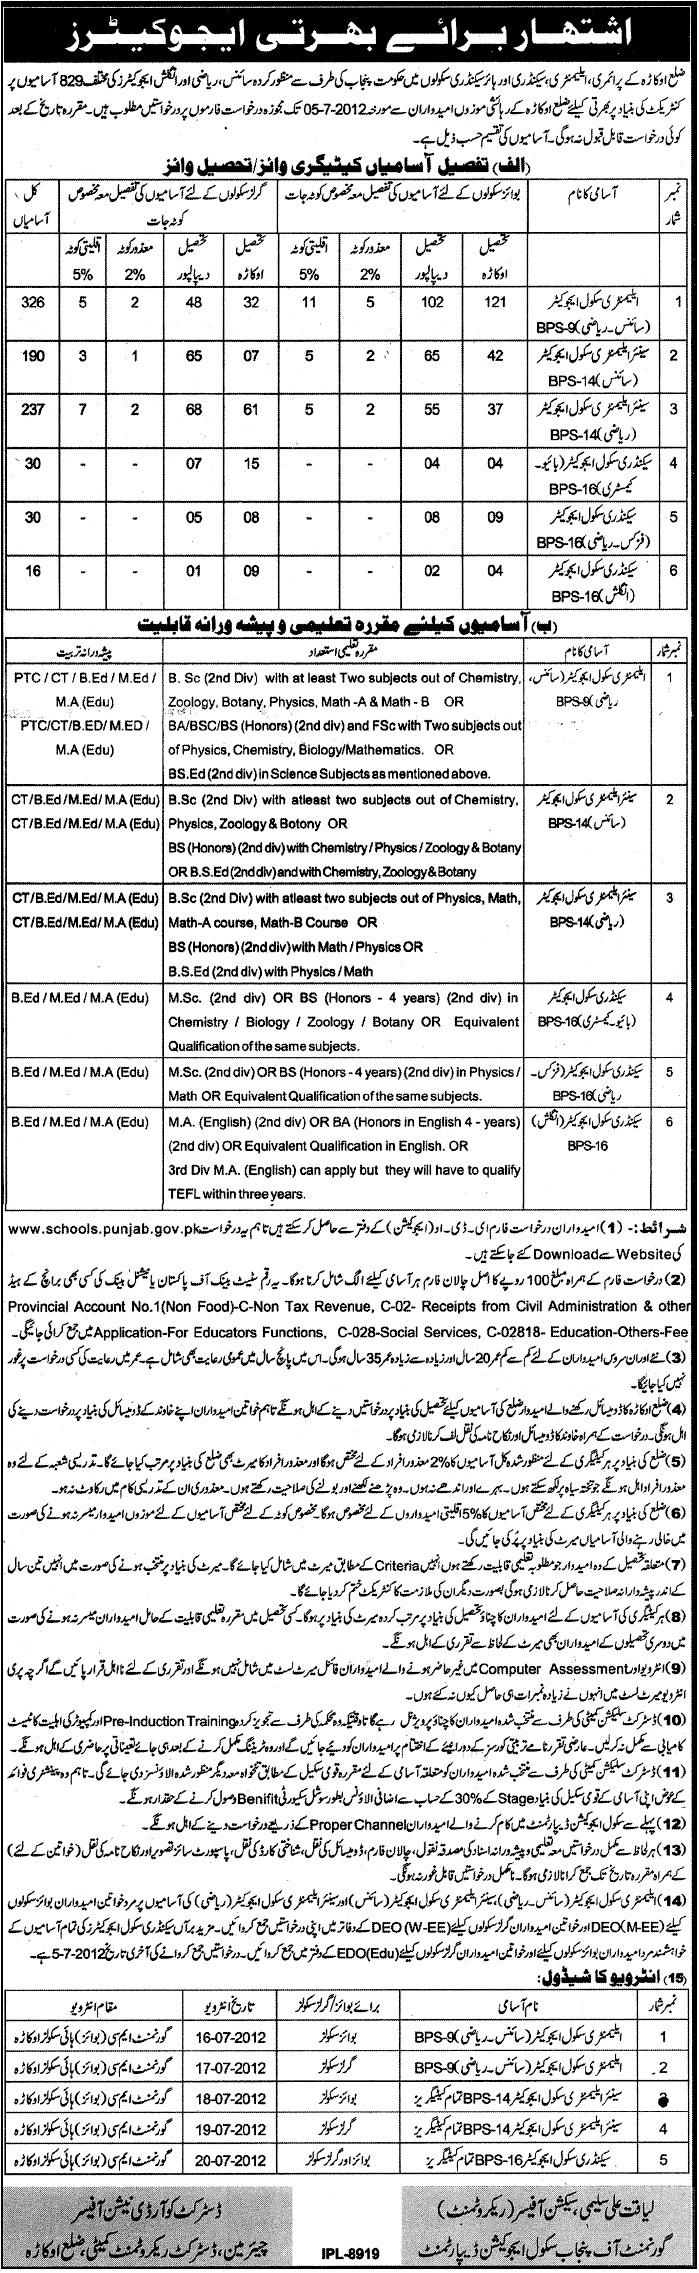 Teachers/Educators Required by Government of Punjab at Primary, Elementary, Secondary and Higher Secondary Schools (Okara District) (829 Vacancies) (Govt. Job)